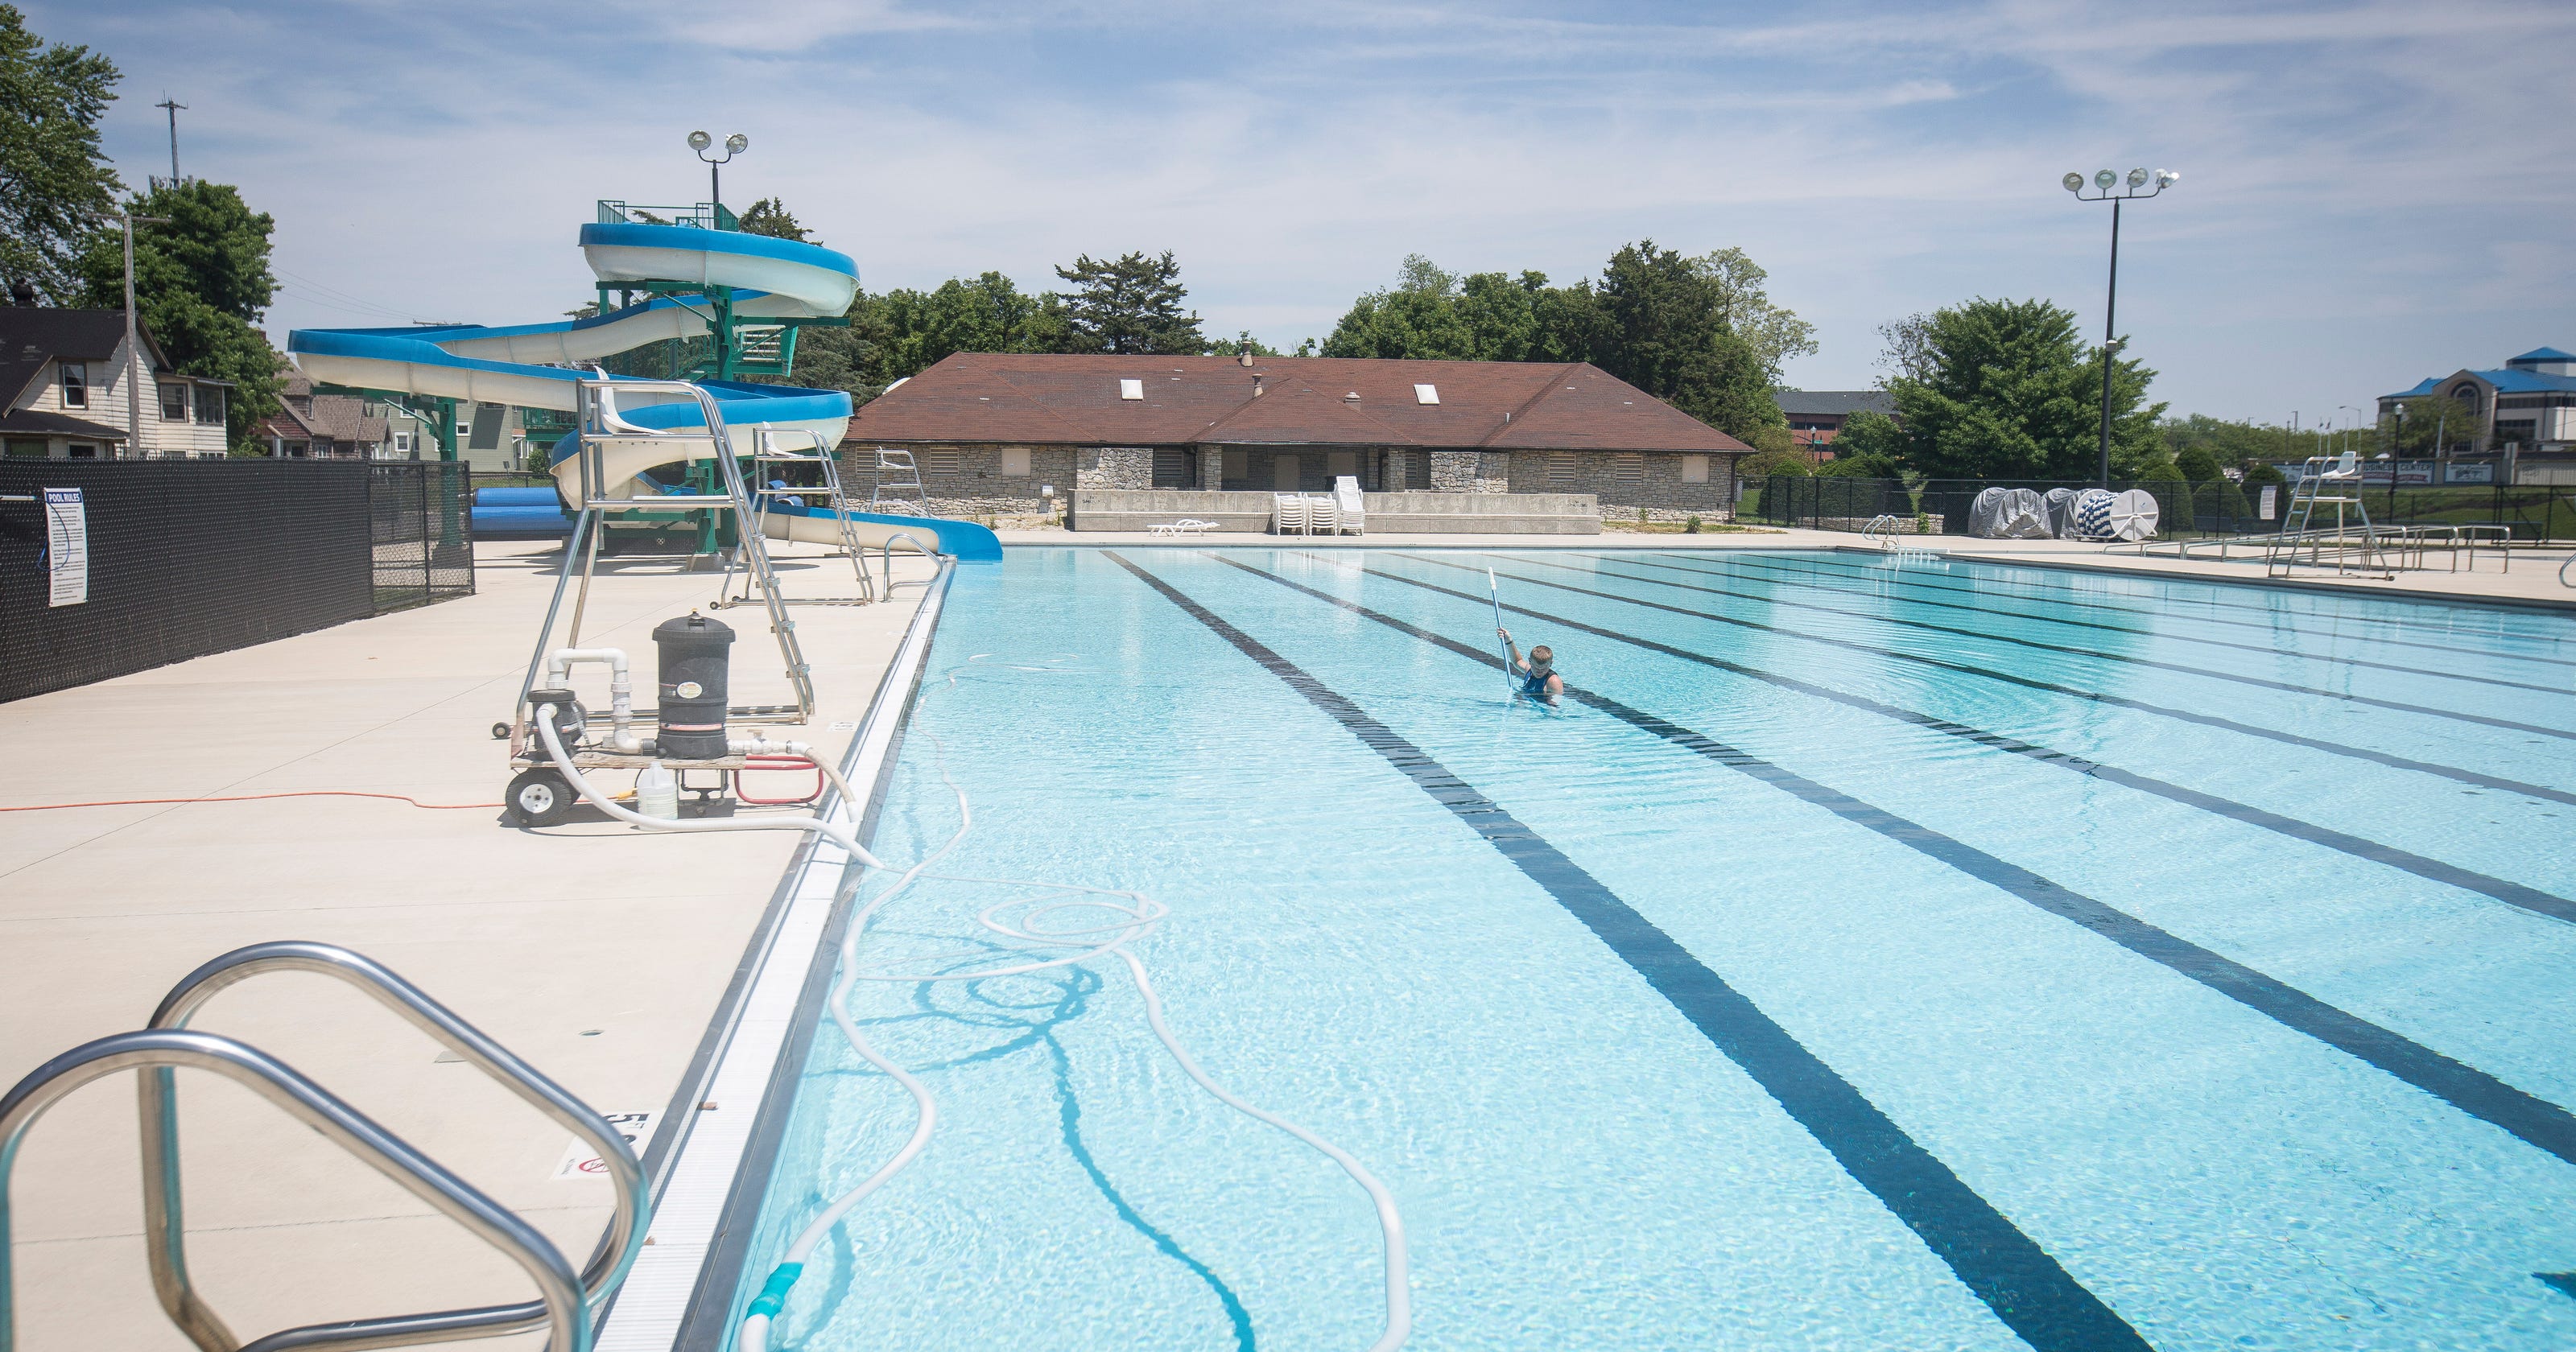 List Hours Prices For Area Public Pools